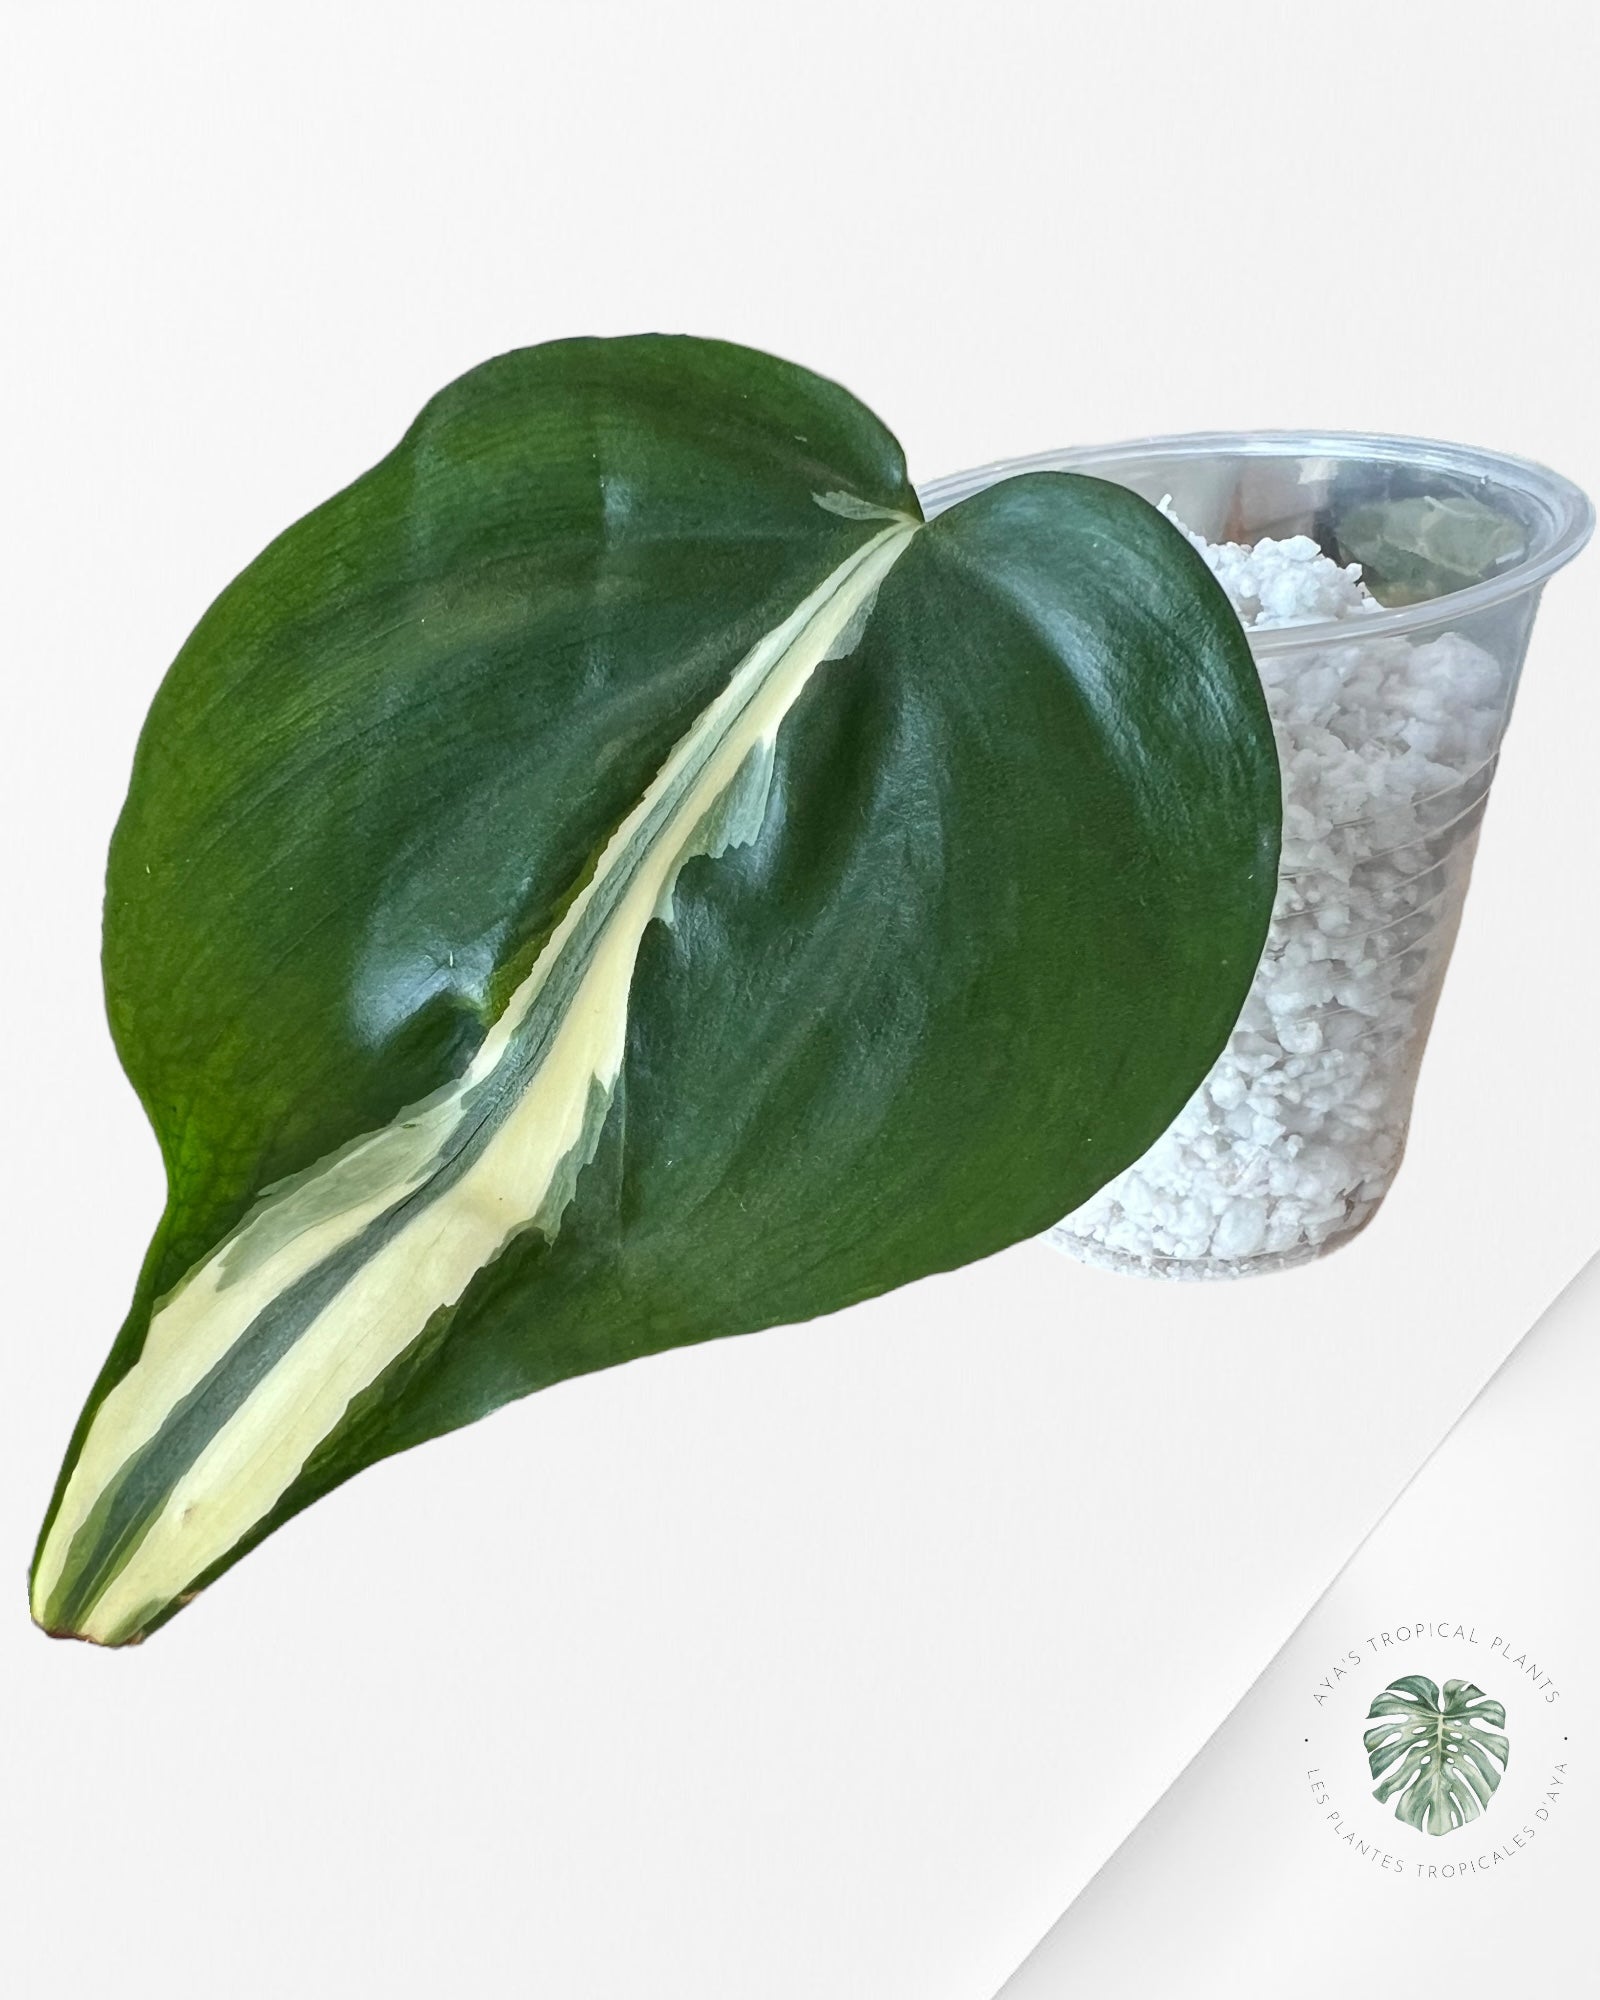 Philodendron Hederaceum 'Rio'-3021